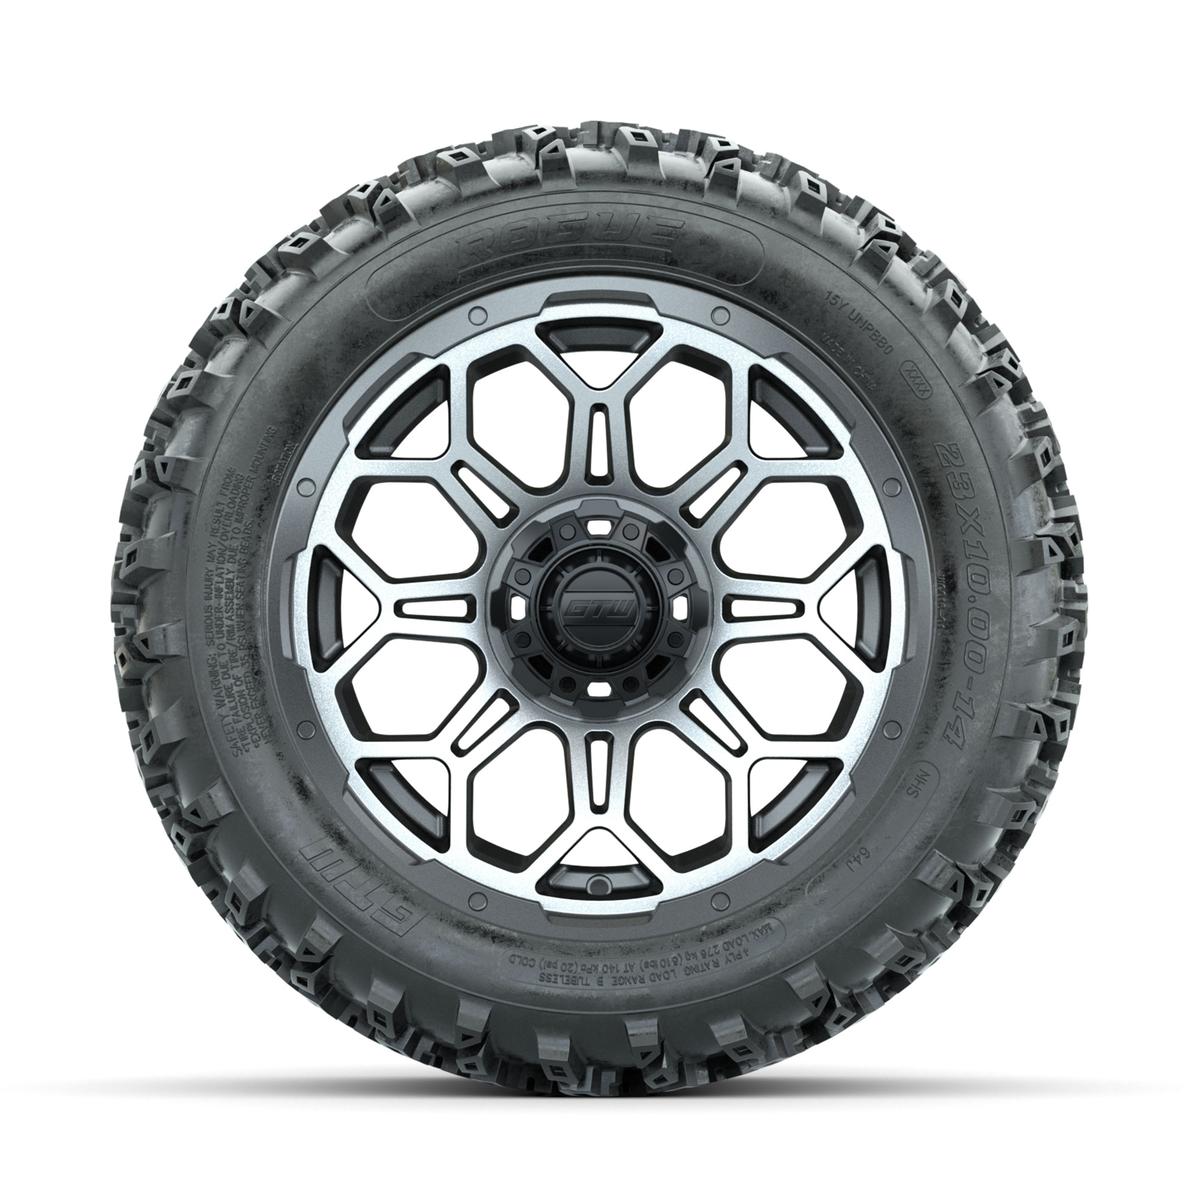 GTW Bravo Machined/Matte Grey 14 in Wheels with 23x10.00-14 Rogue All Terrain Tires – Full Set